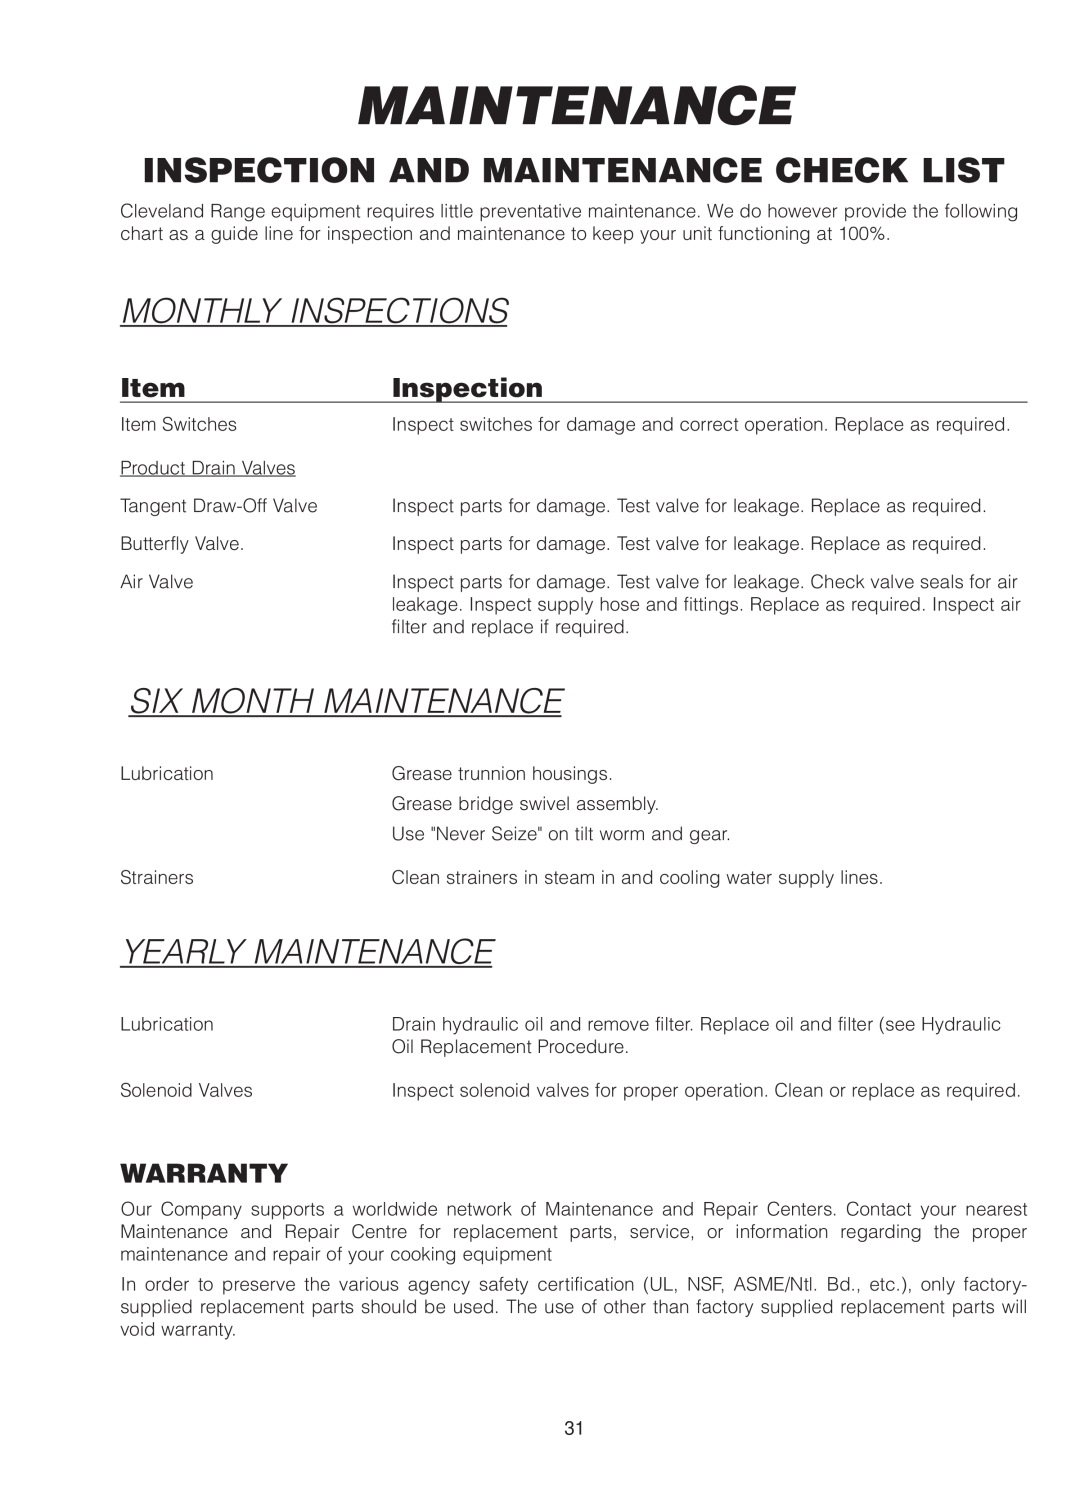 Cleveland Range MKDL-80-CC manual Inspection And Maintenance Check List, Monthly Inspections, Six Month Maintenance 